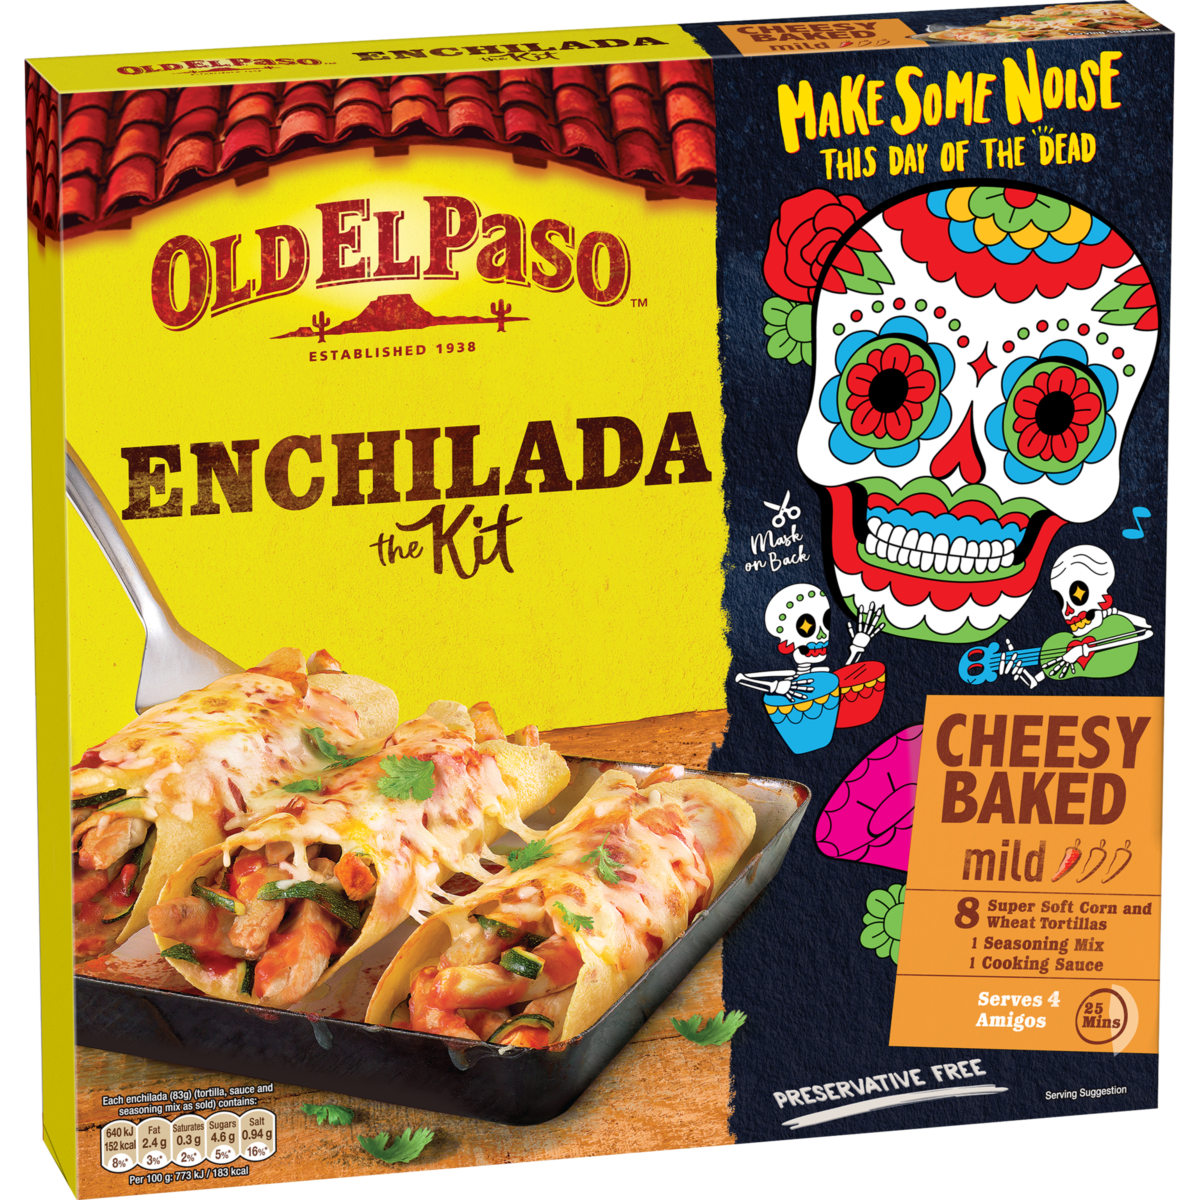 Old El Paso – Cheesy Baked Enchilada kit – DAY OF THE DEAD